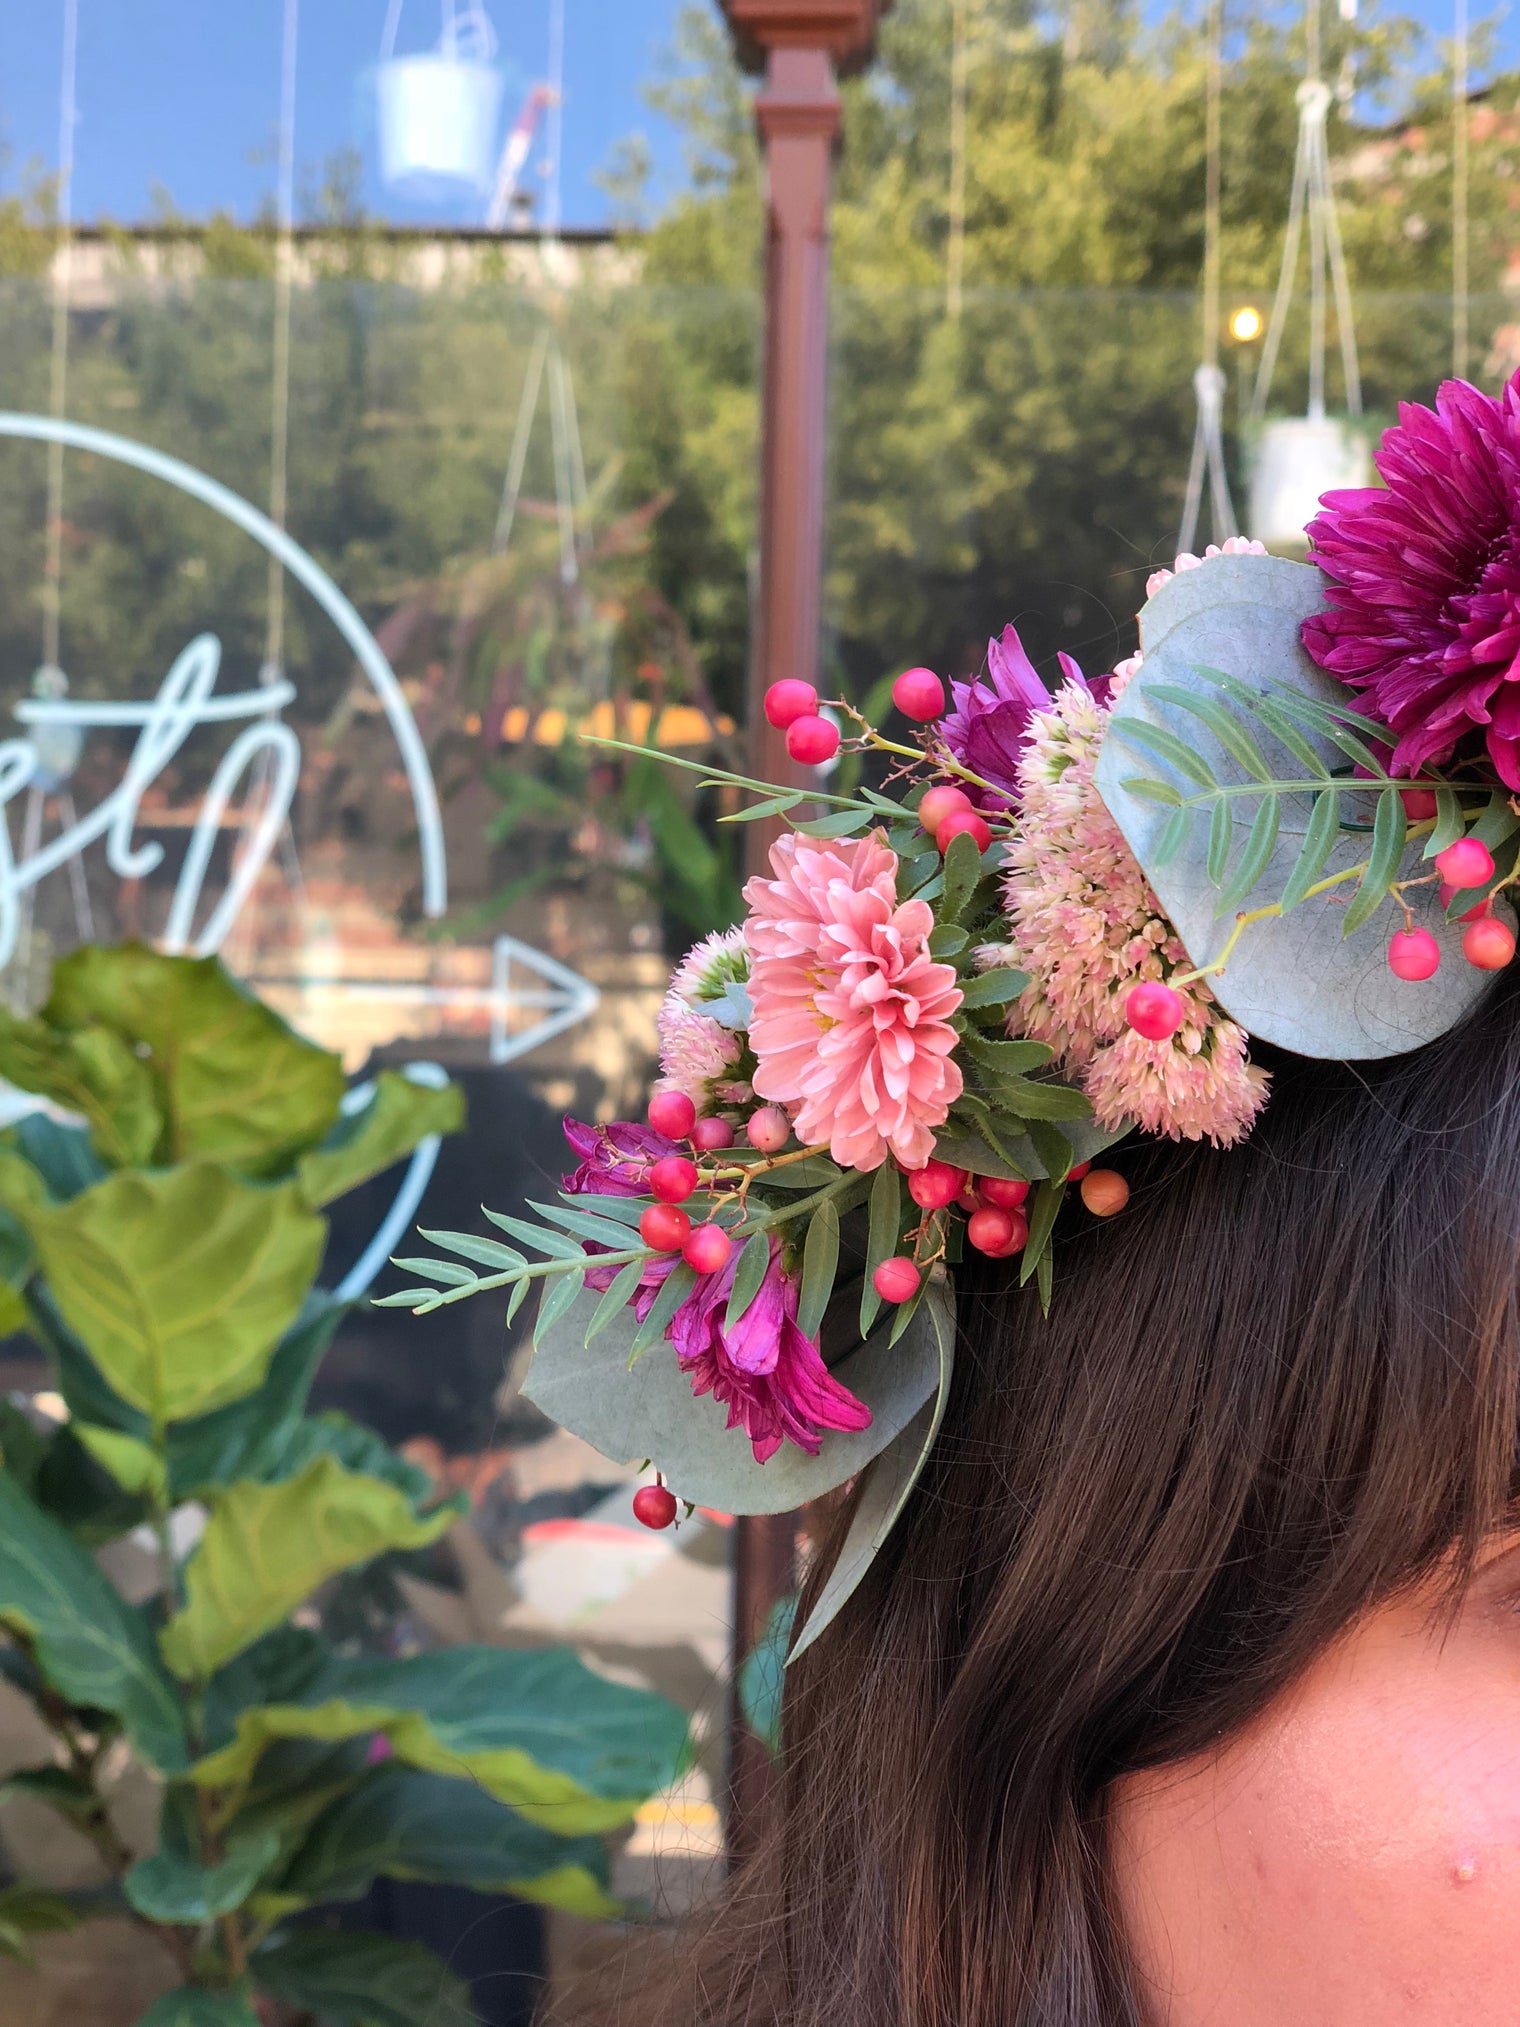 History of the popular Flower Crown